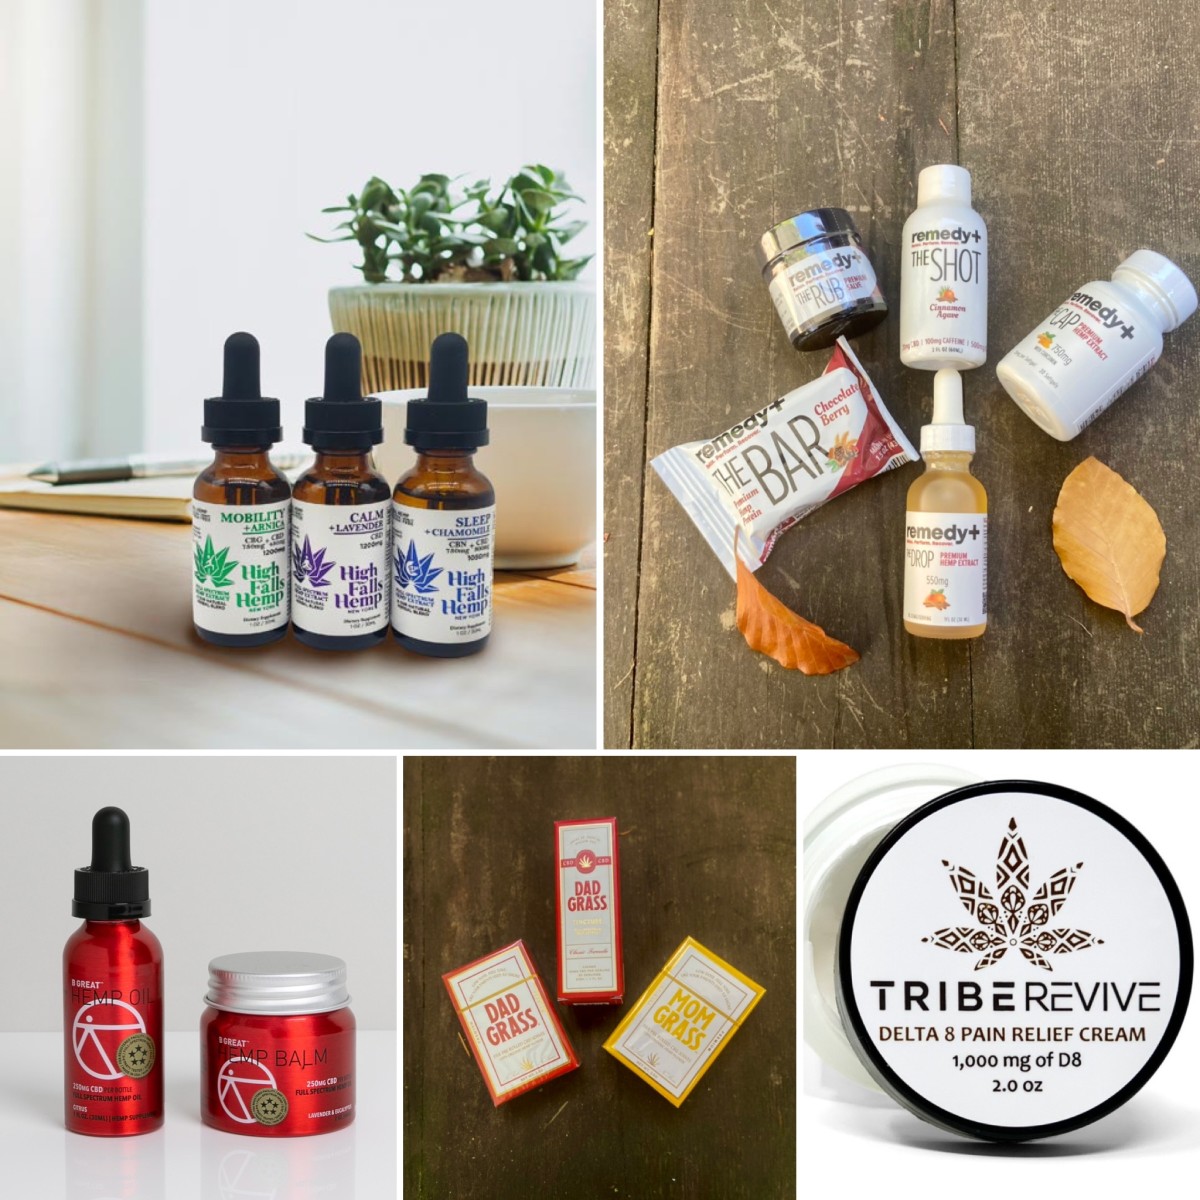 High Falls Hemp tinctures, Remedy+ line of CBD products, B-Great stress relief bundle, Dad and Mom Grass prerolls, Tribe Tokes D8 pain relief cream